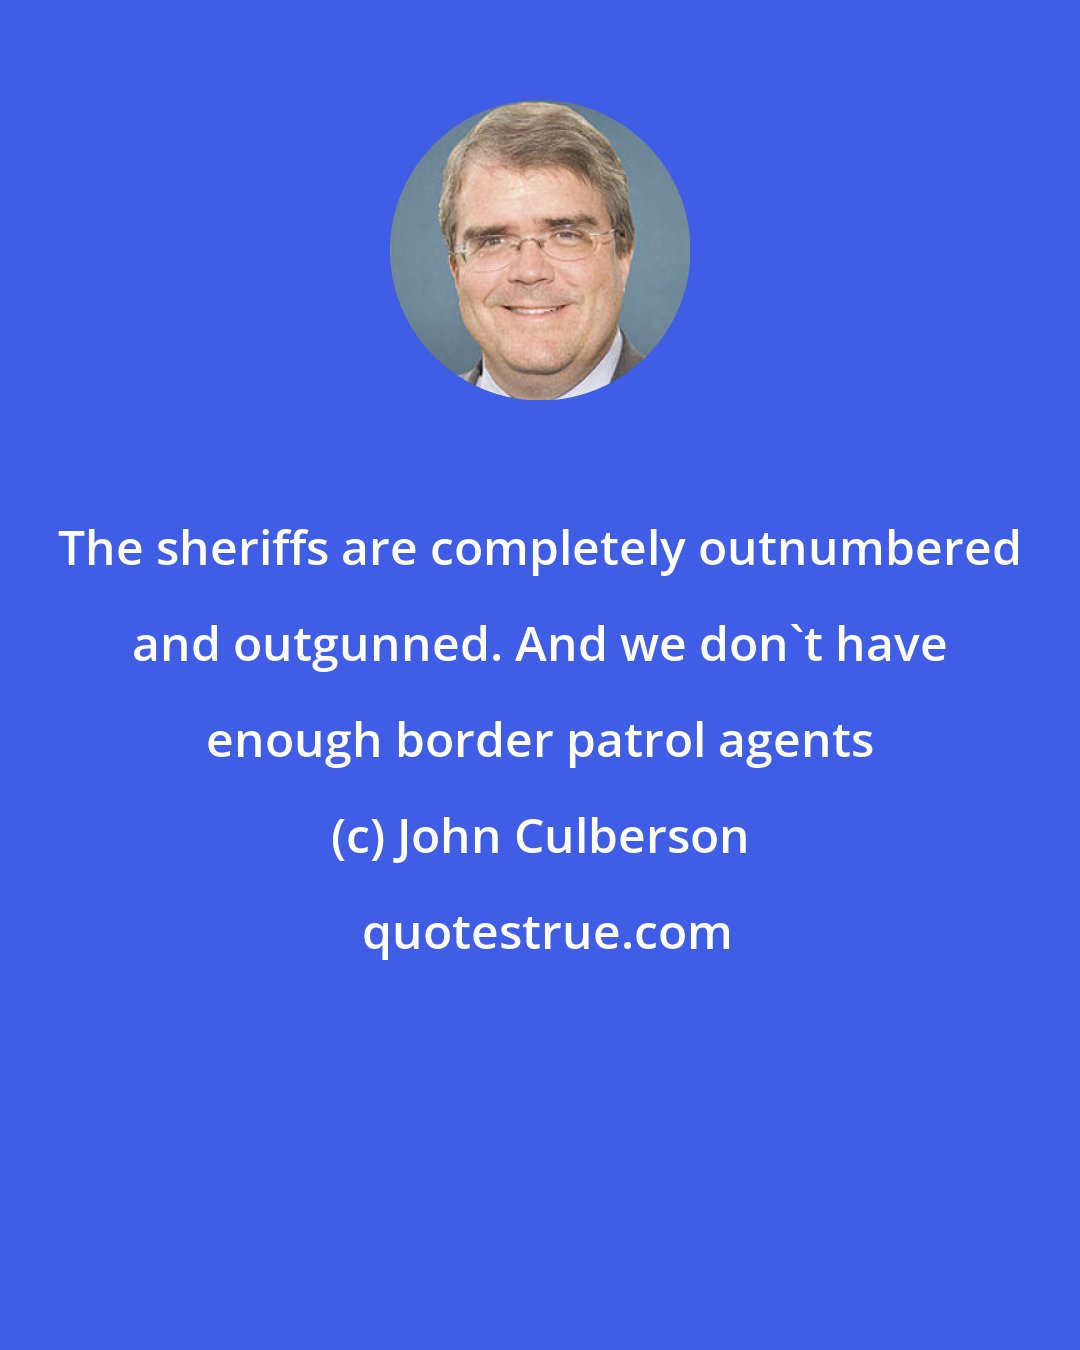 John Culberson: The sheriffs are completely outnumbered and outgunned. And we don't have enough border patrol agents